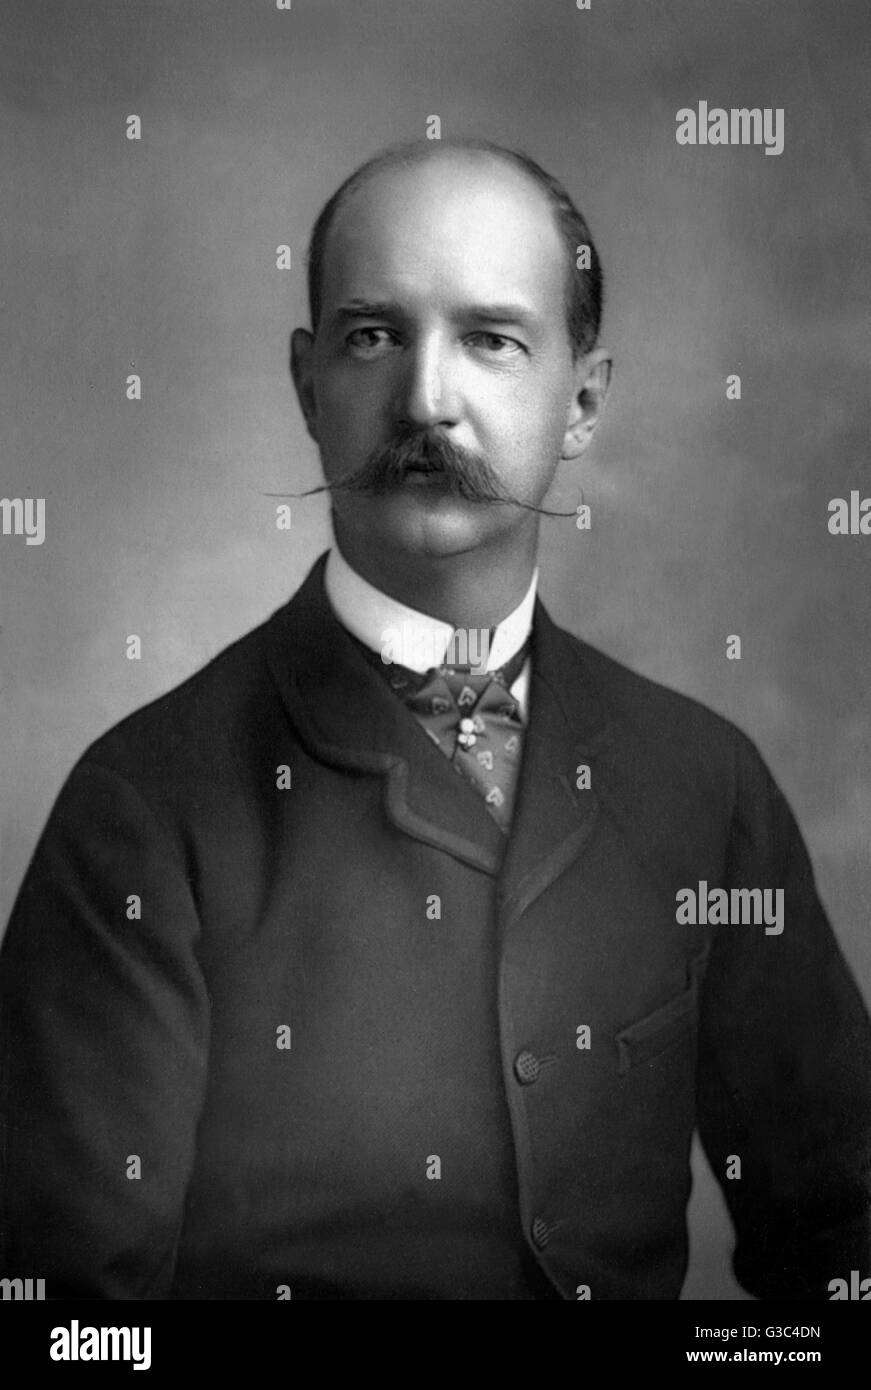 George I (1845-1913), King of Greece, second son of Prince Christian of Schleswig-Holstein-Sonderburg-Gl&#x23af38b5;rg and Louise of Hesse-Kassel.     Date: 1890 Stock Photo